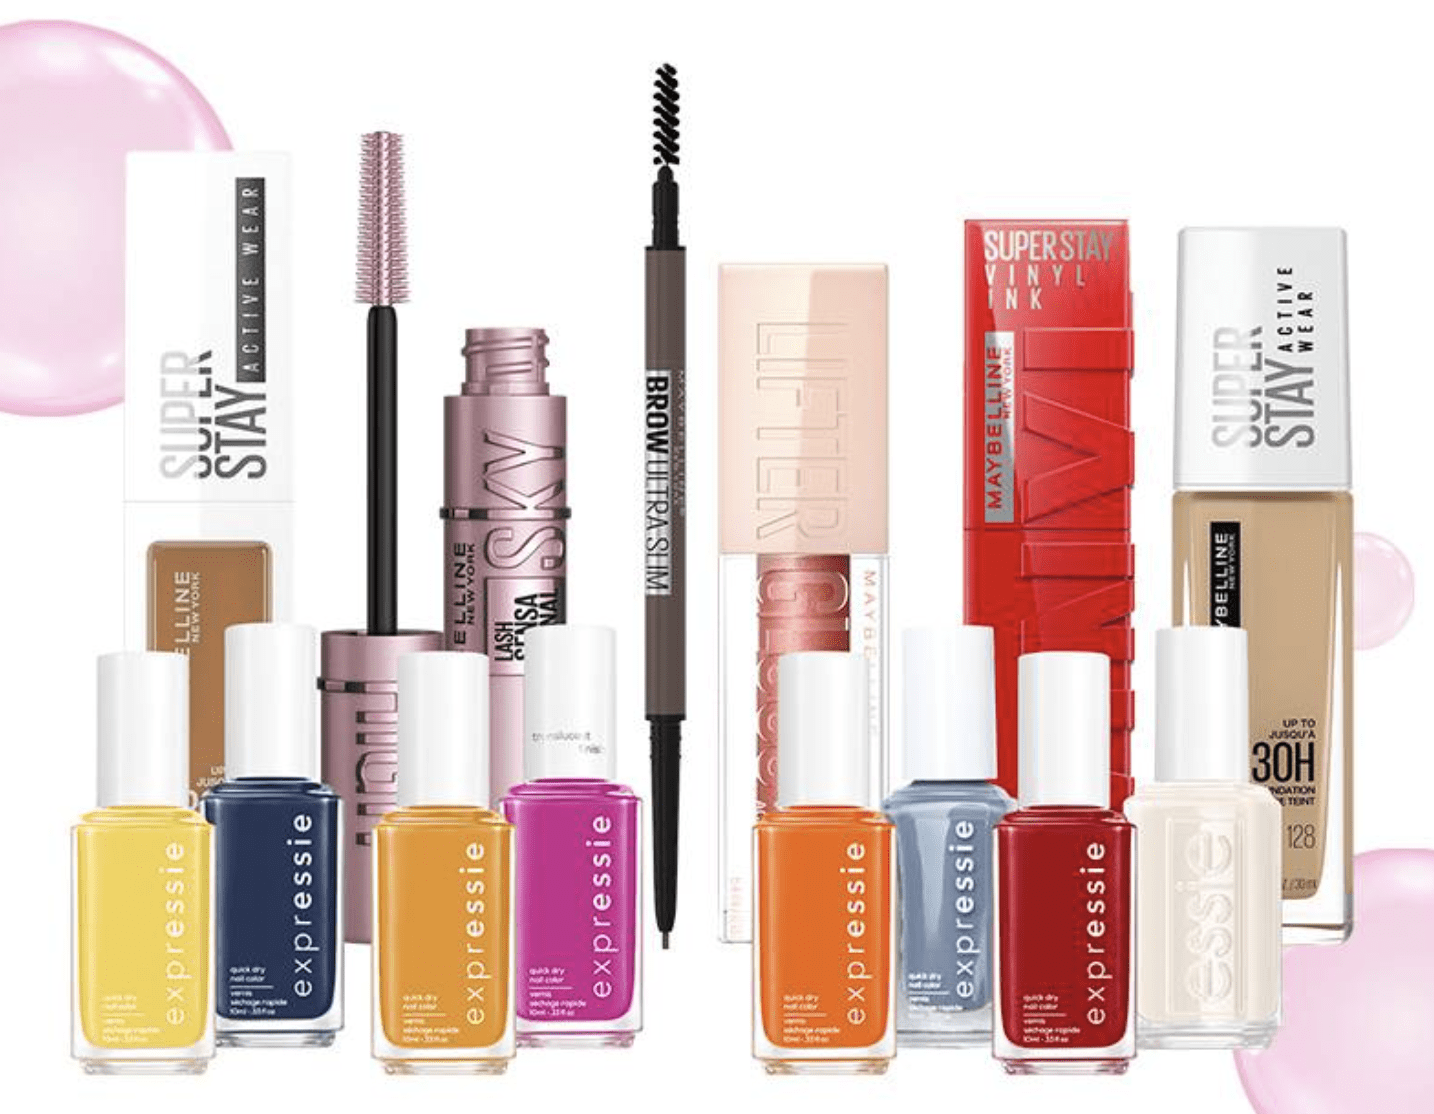 Maybelline Contest Canada